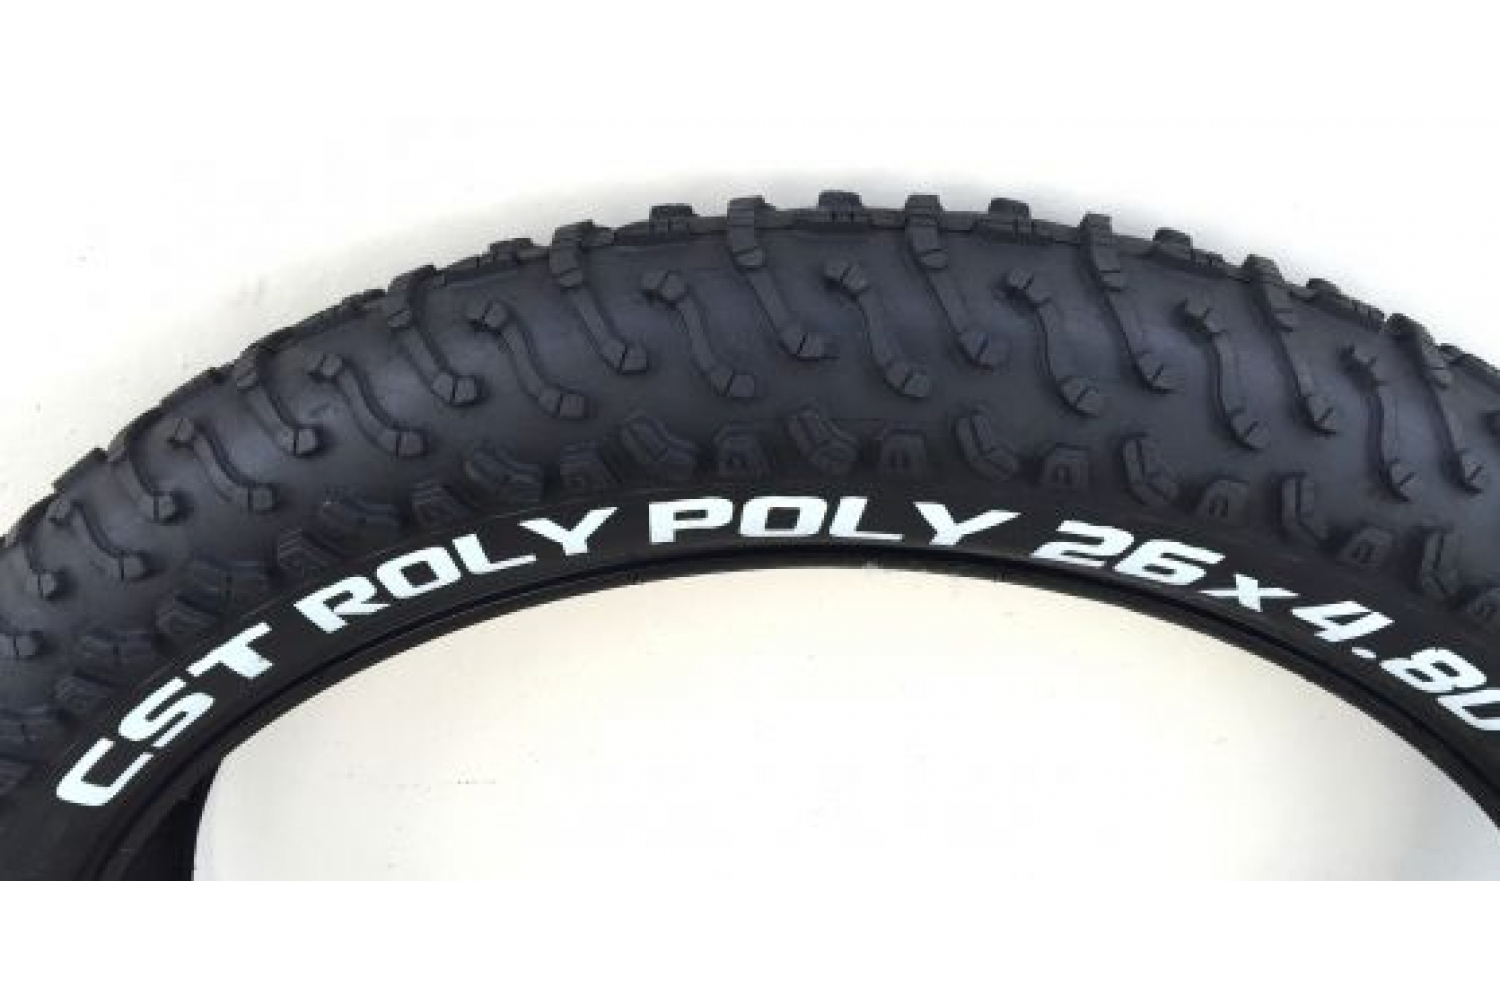 cst roly poly